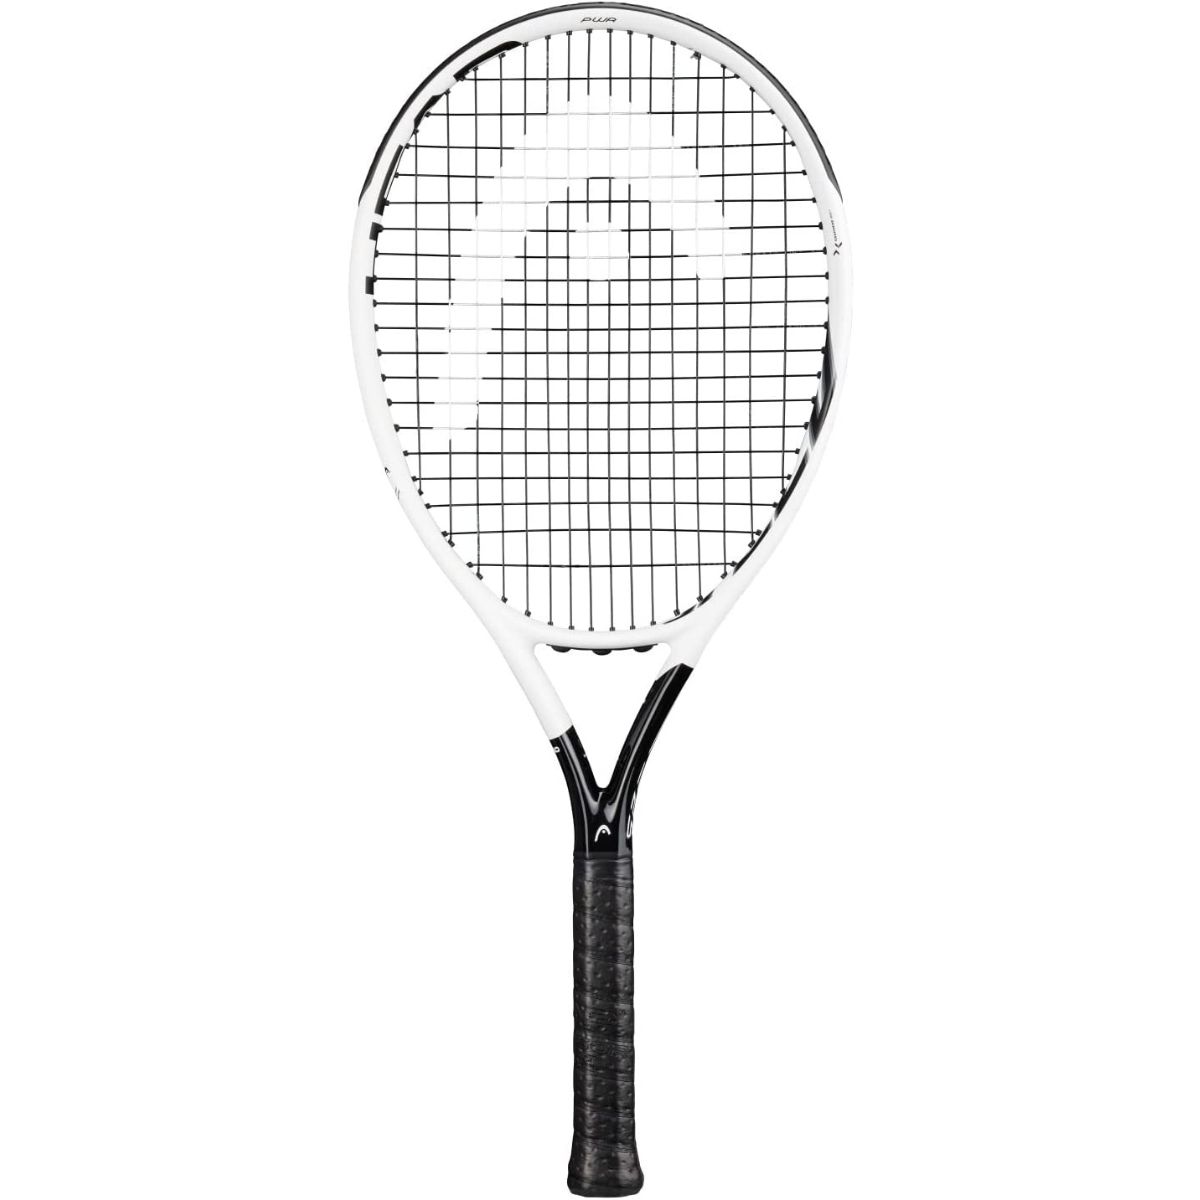 The Best Tennis Rackets for Tennis Elbow Options: Head Graphene 360+ Speed PWR